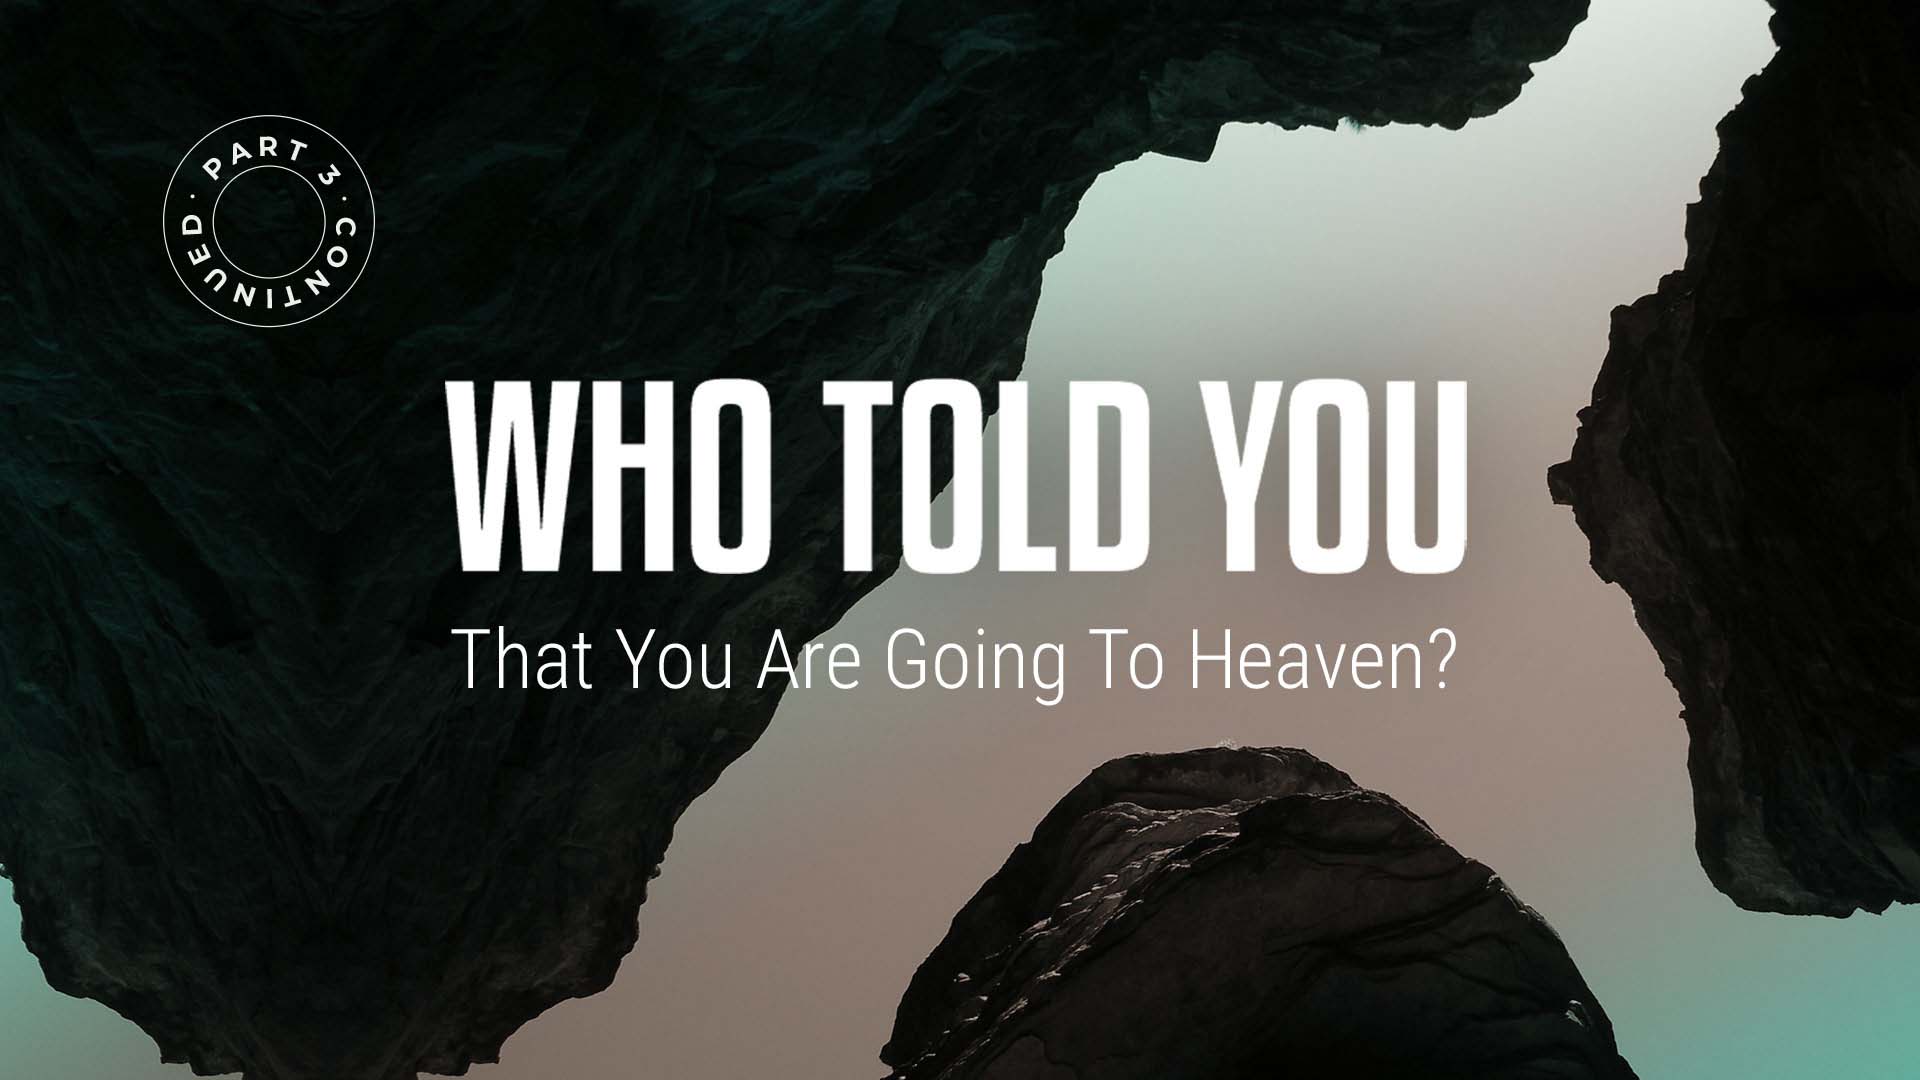 Who Told You That You Are Going To Heaven? – Part 3 Continued